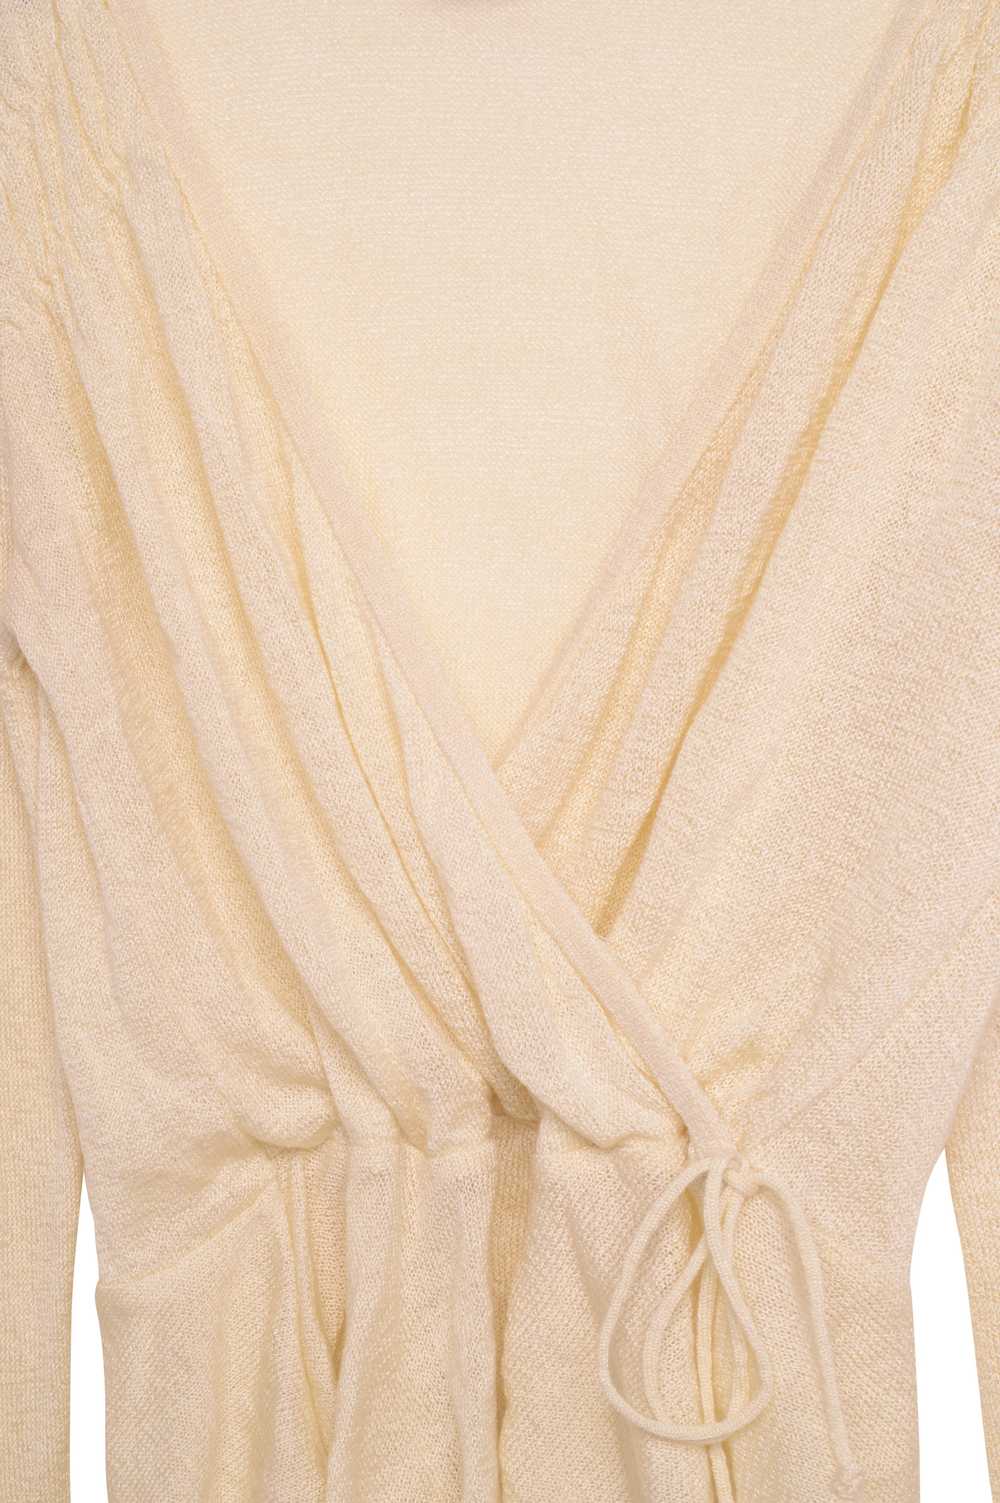 1970s Bell Sleeve Top - image 2